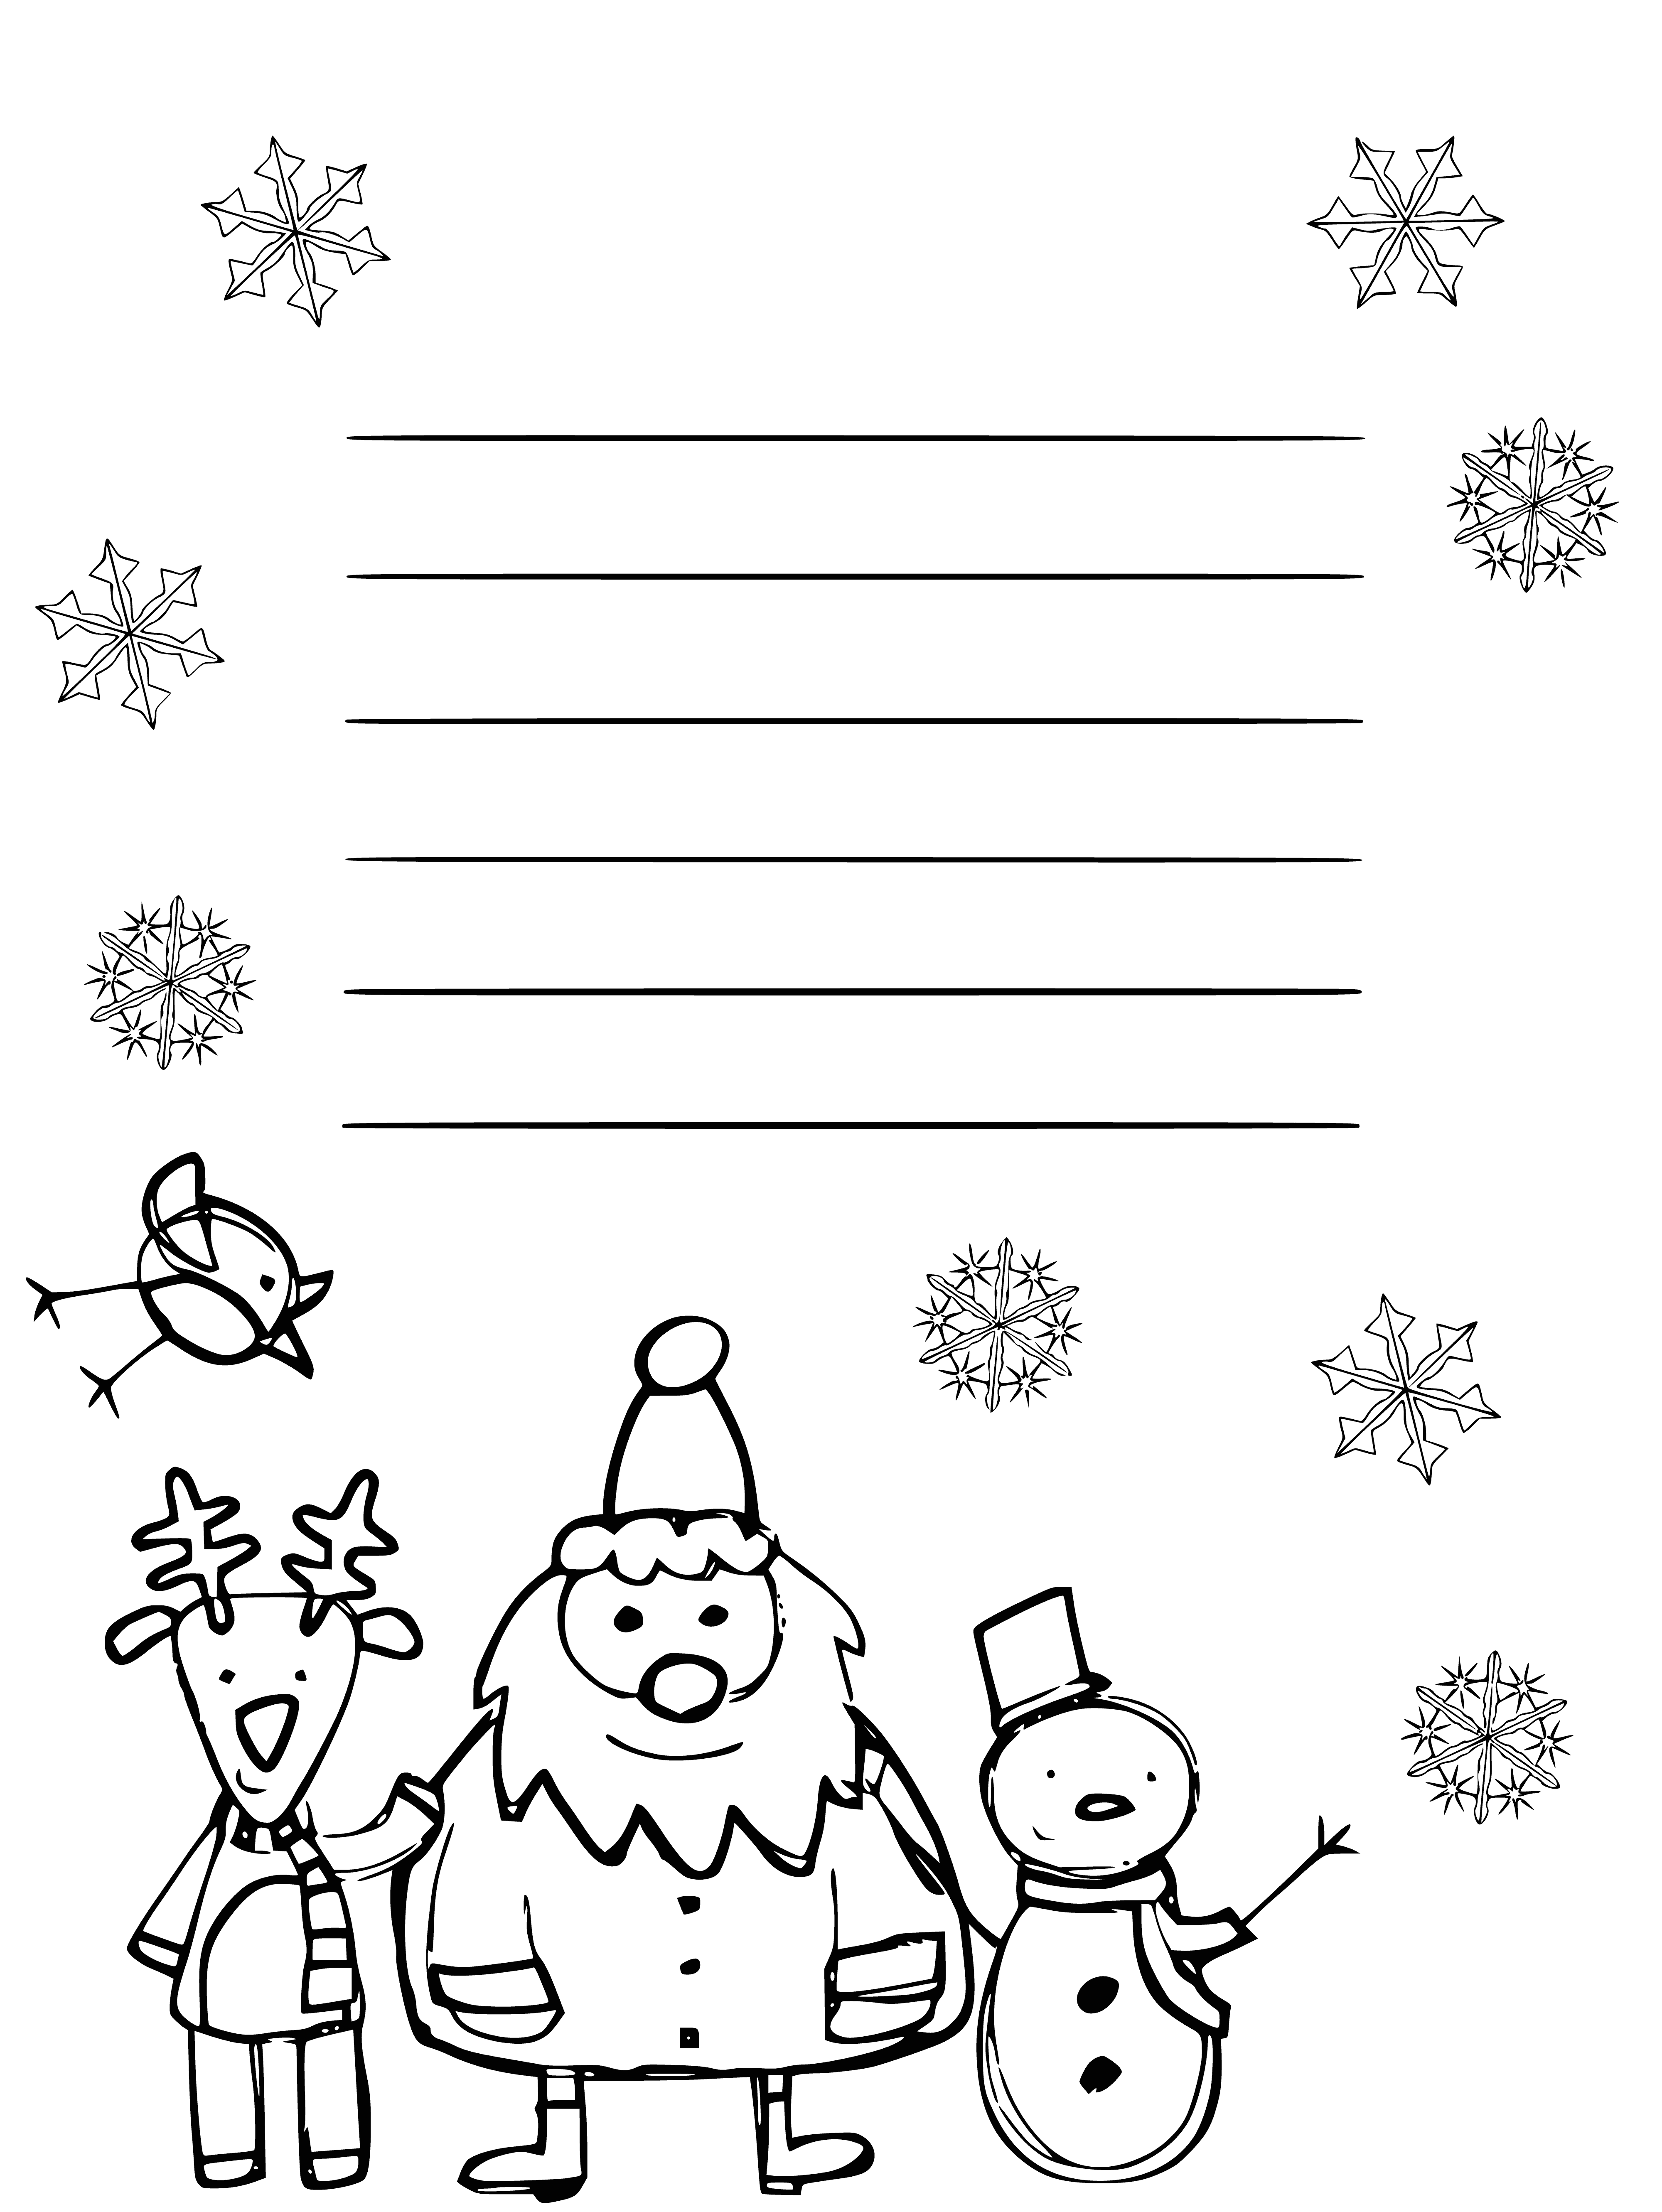 coloring page: Child wants a baby doll, clothes, watch, bicycle. Letter is written in pencil on lined paper and signed.